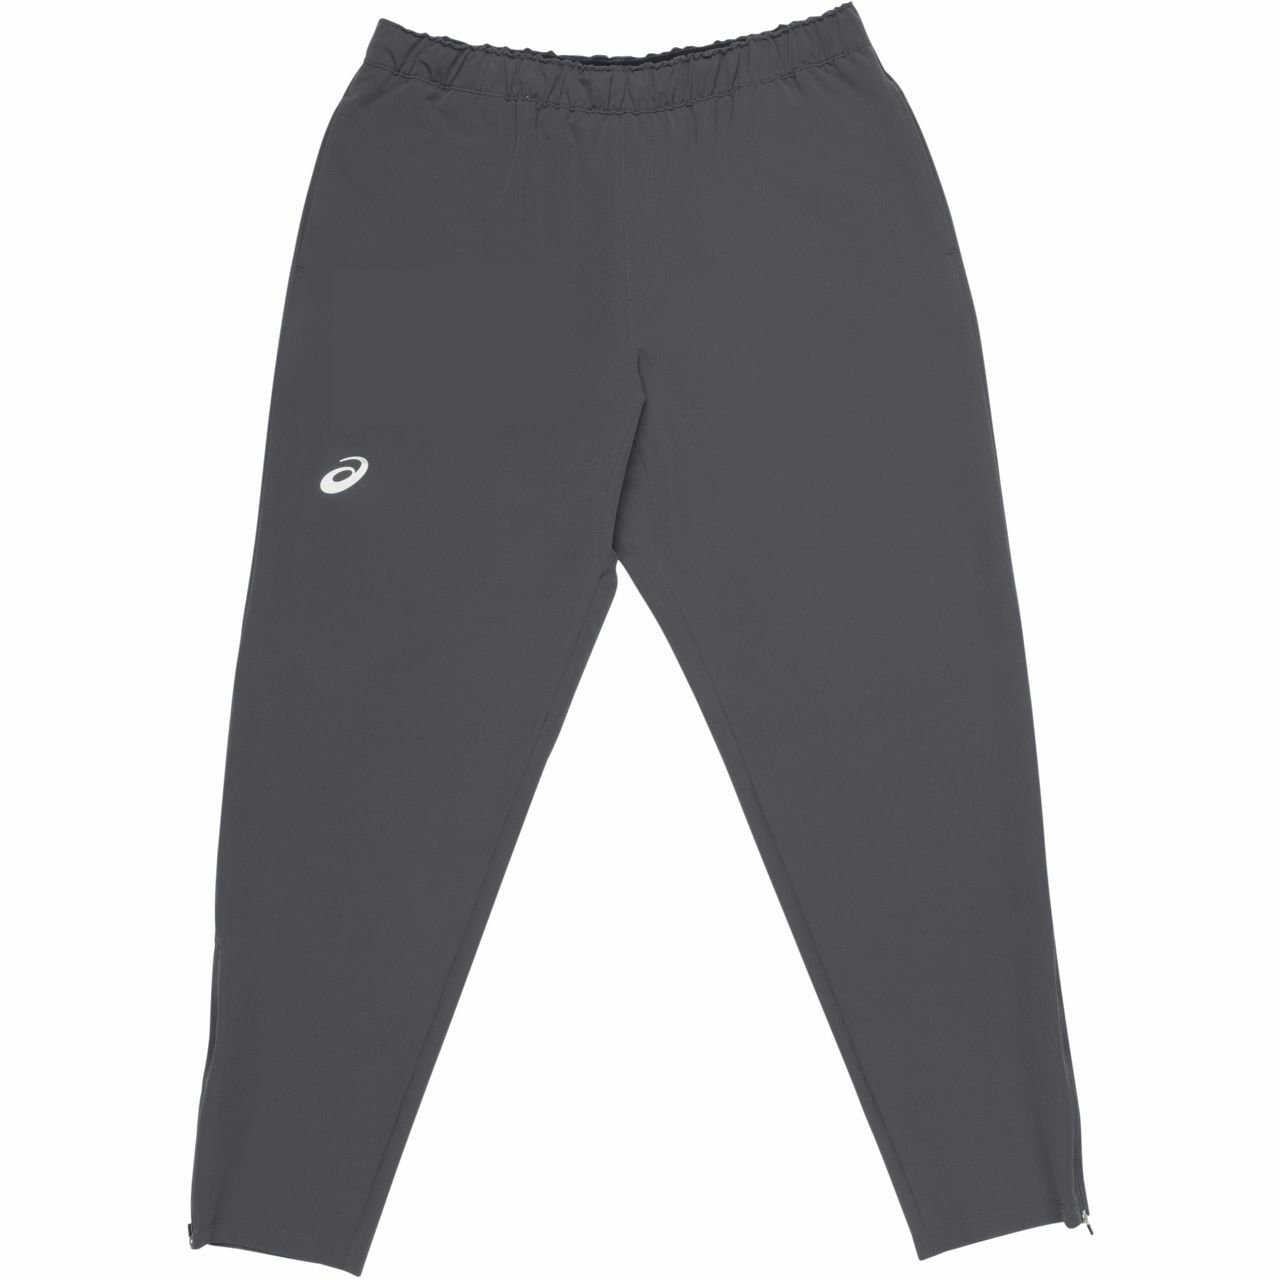 Buy Asics Trousers online - Men - 34 products | FASHIOLA.in